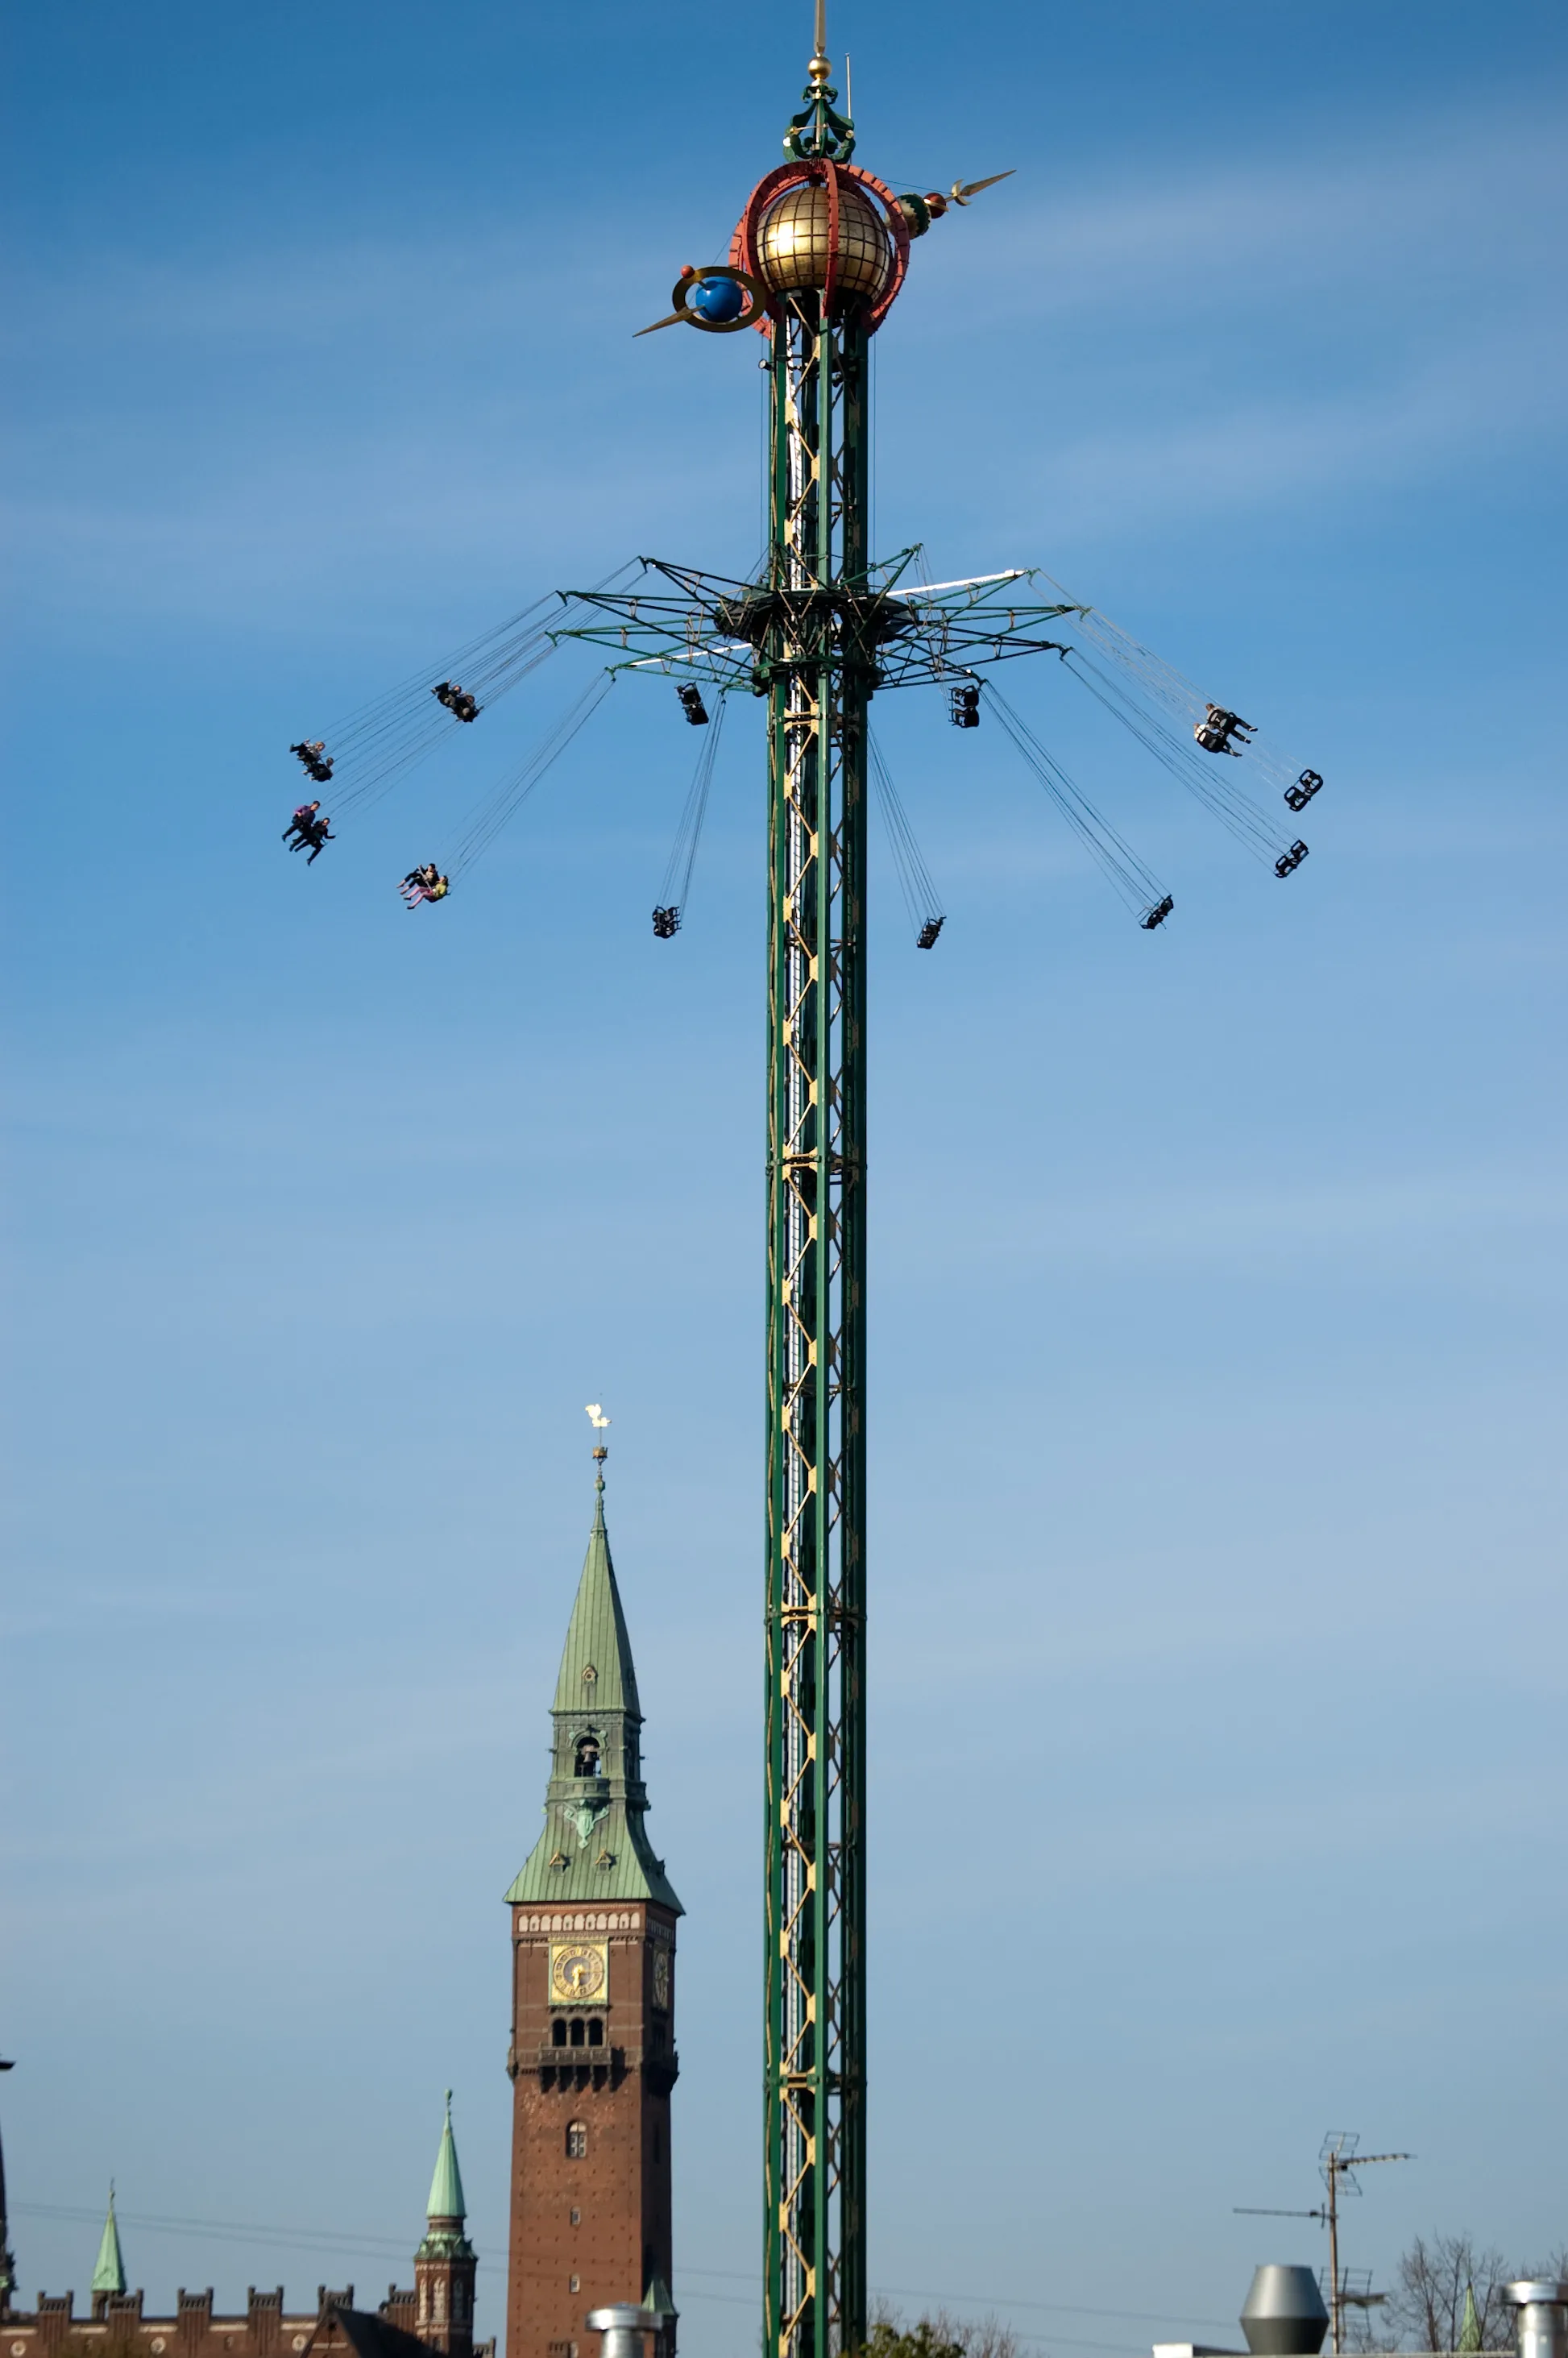 Photo showing: Himmelskibet )"Ship in the Sky"), a ride in Tivoli Gardens in Copenhagen, Denmark, which affords sweaping views of the city centre